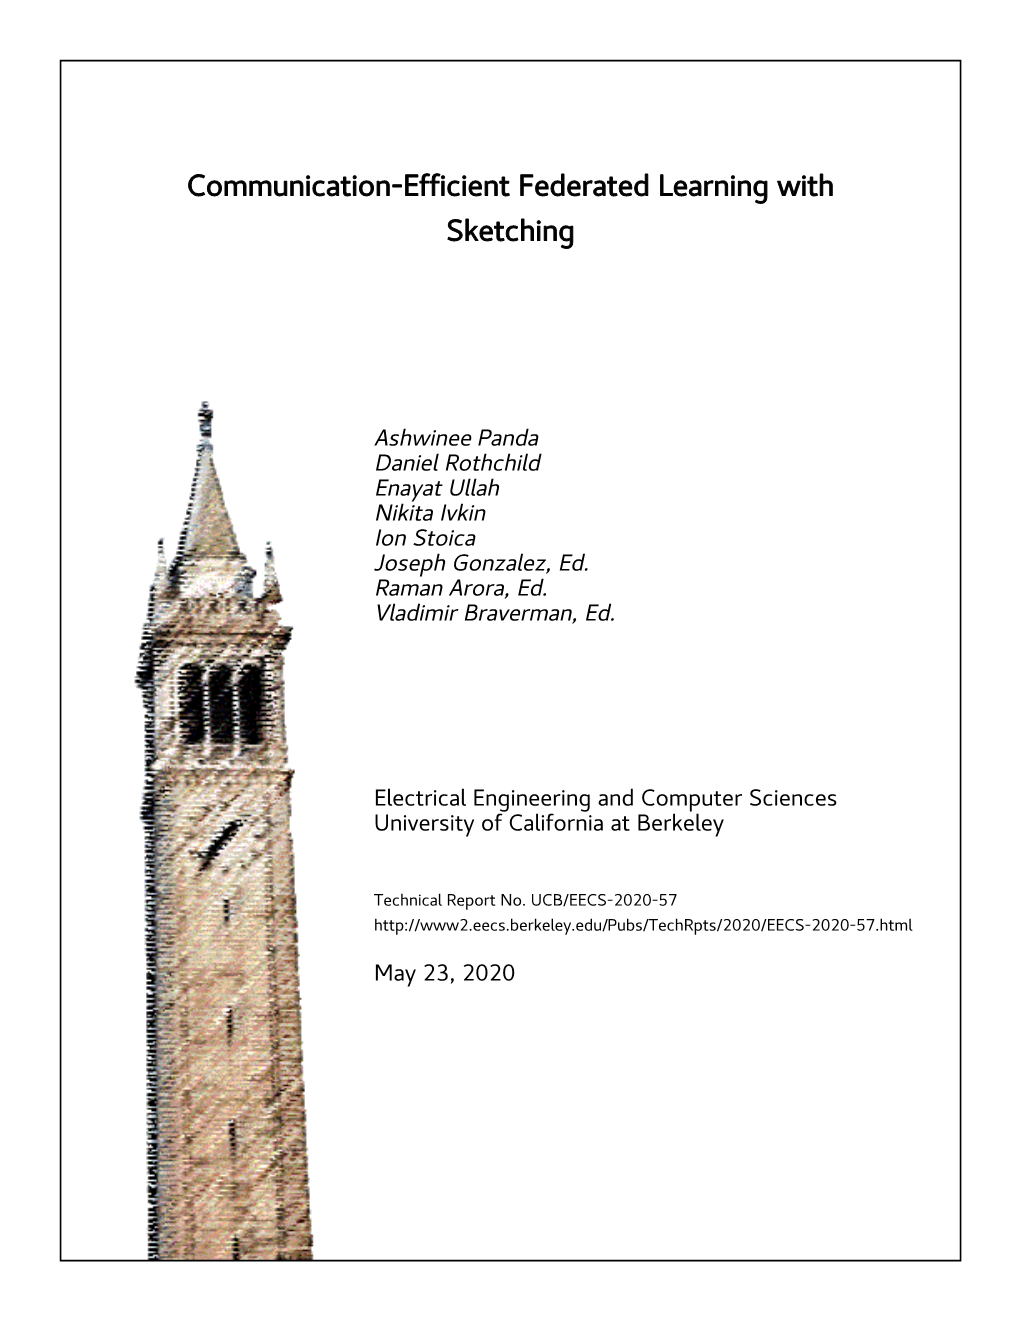 Communication-Efficient Federated Learning with Sketching